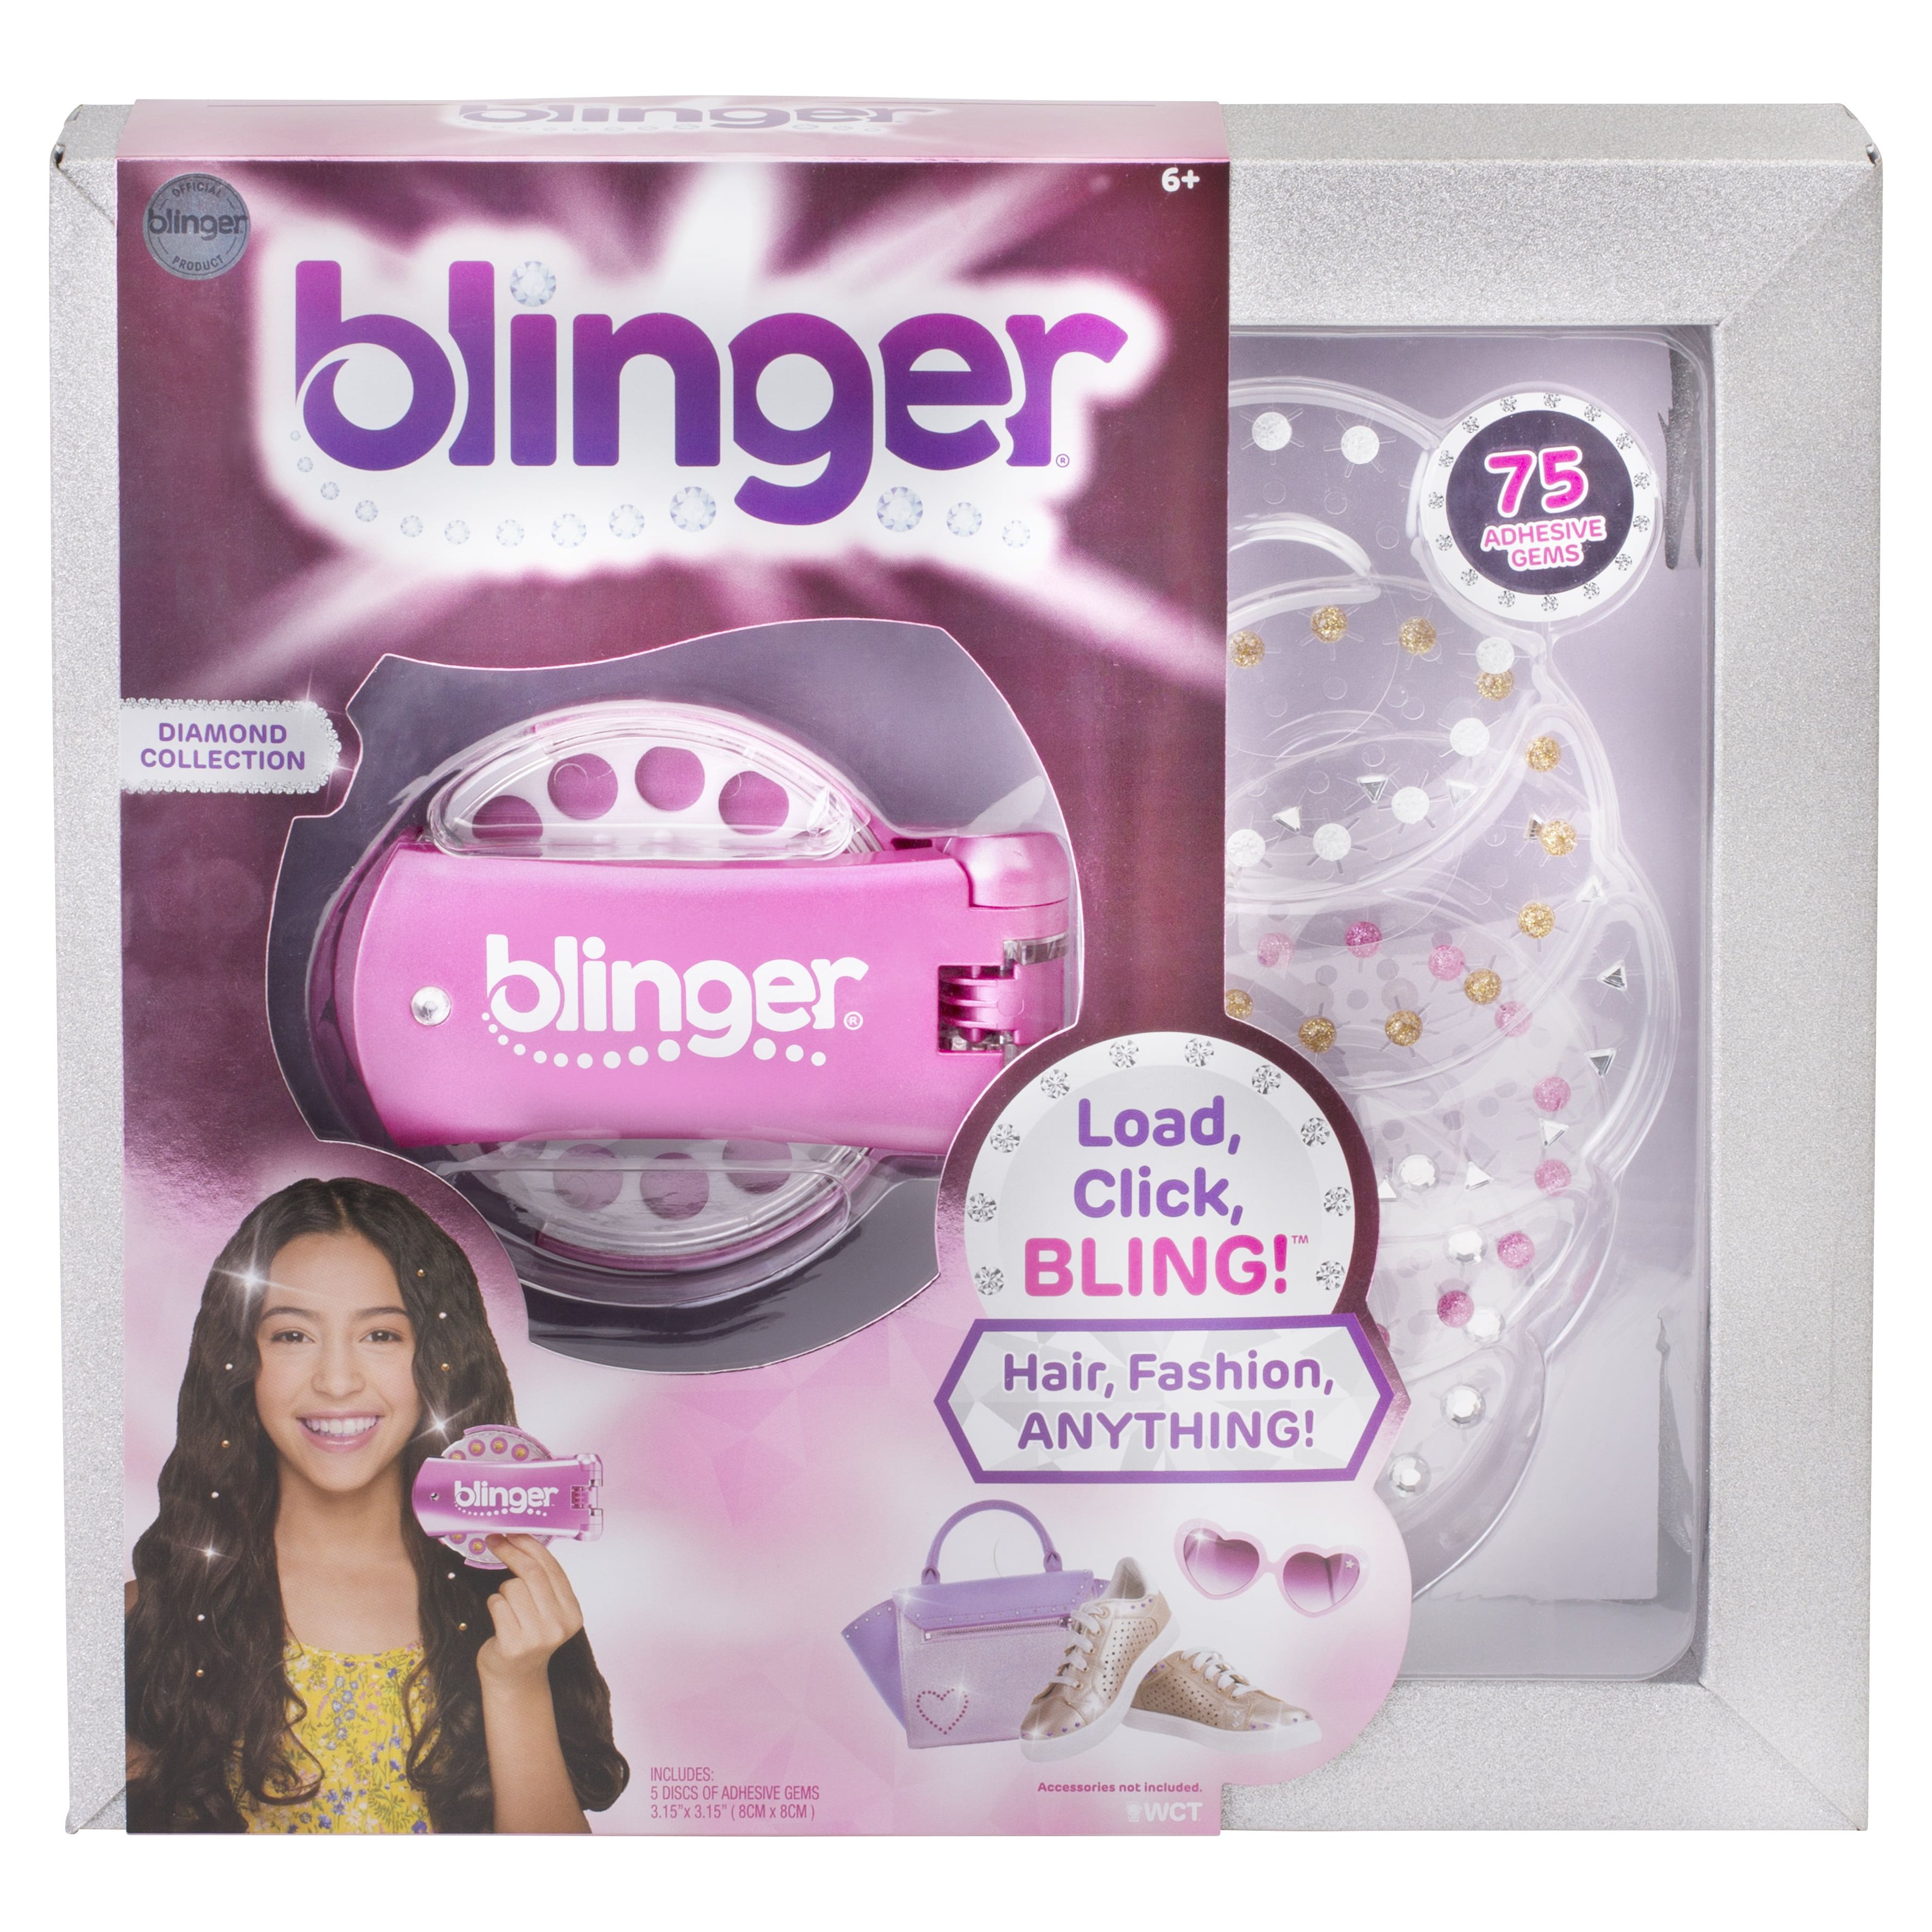 Blinger Diamond Collection Bright Pink with 5 Discs & Glam Styling Tool - image 1 of 7